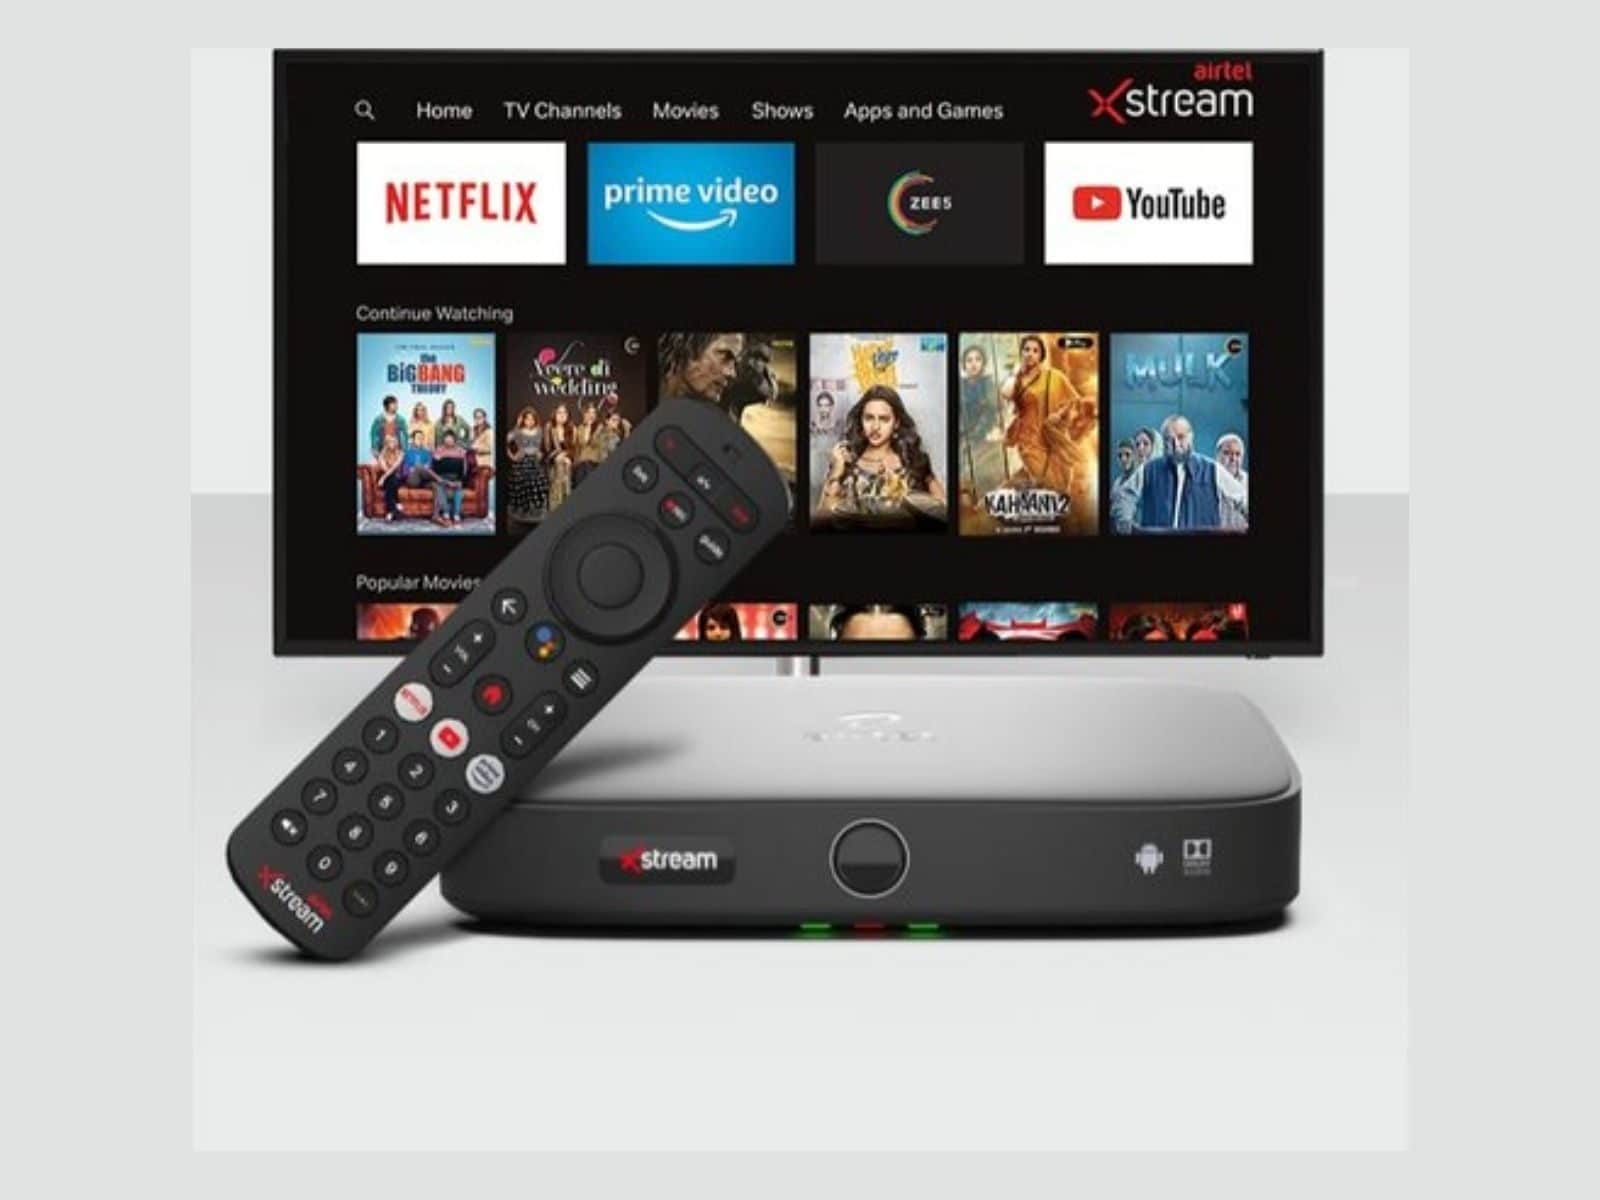 Airtel brings TV, streaming together in converged platform Xstream | Mint